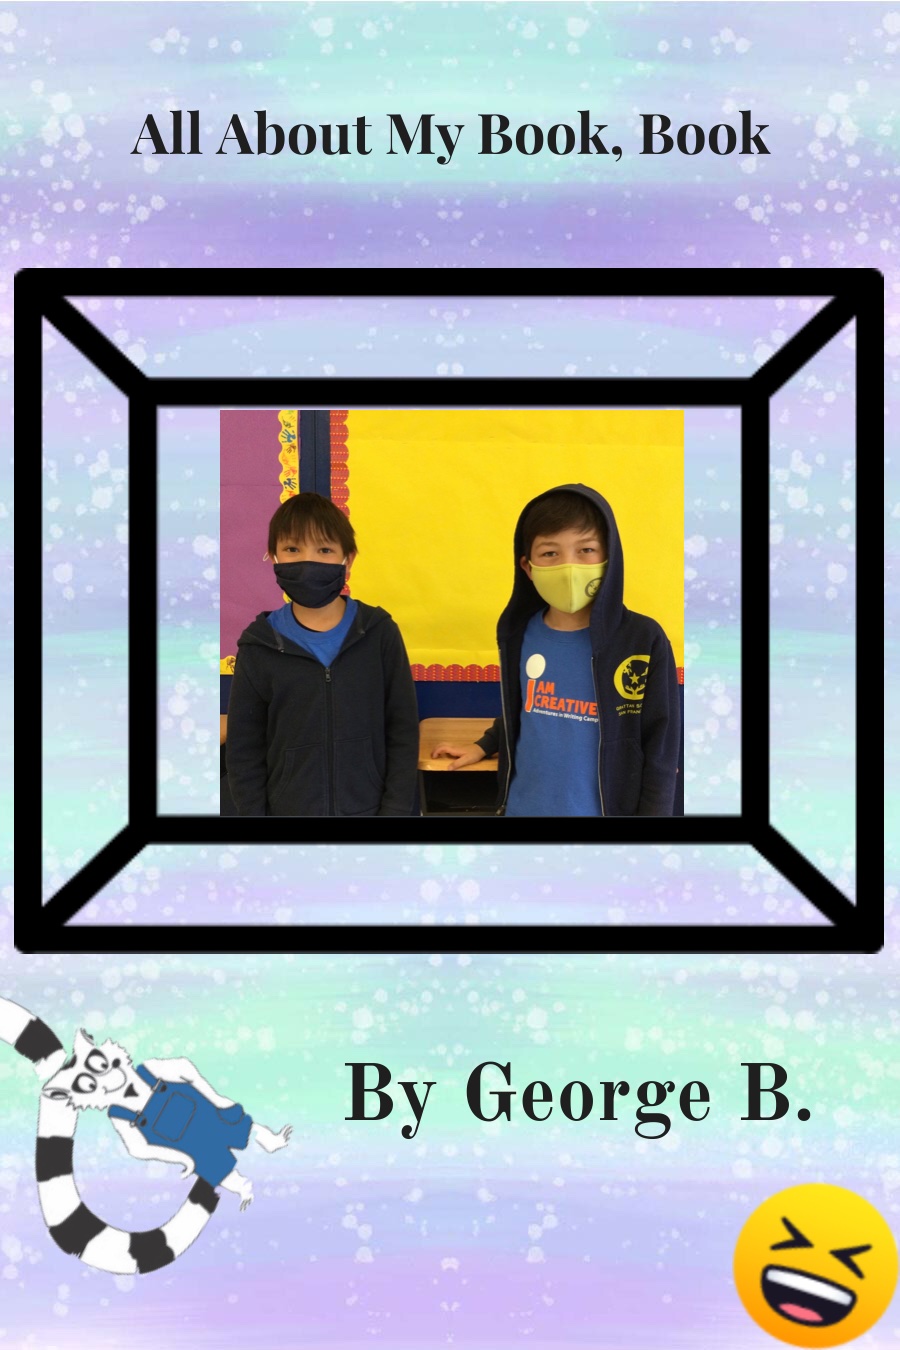 All About My Book, Book by George B